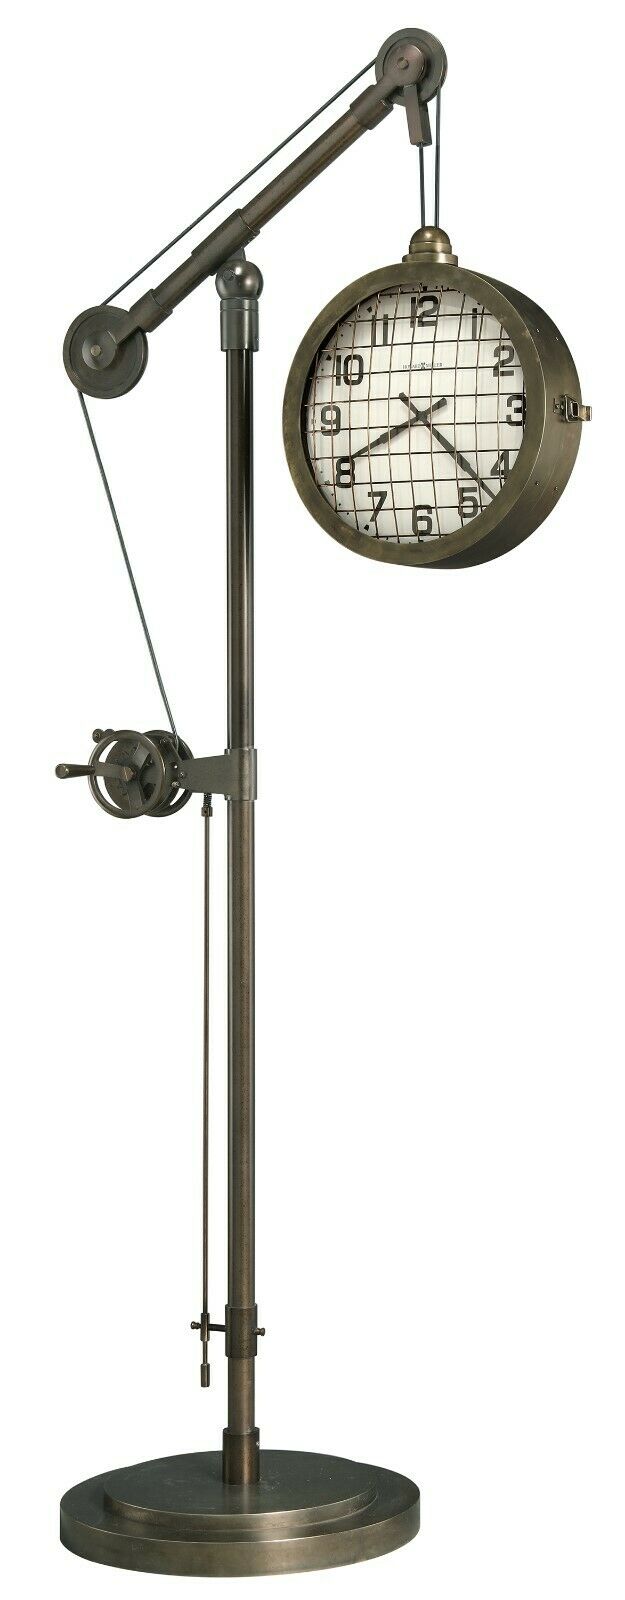 NEW HOWARD MILLER ULTRA CONTEMPORARY FLOOR CLOCK KNOWN AS THE PULLEY TIME 615092